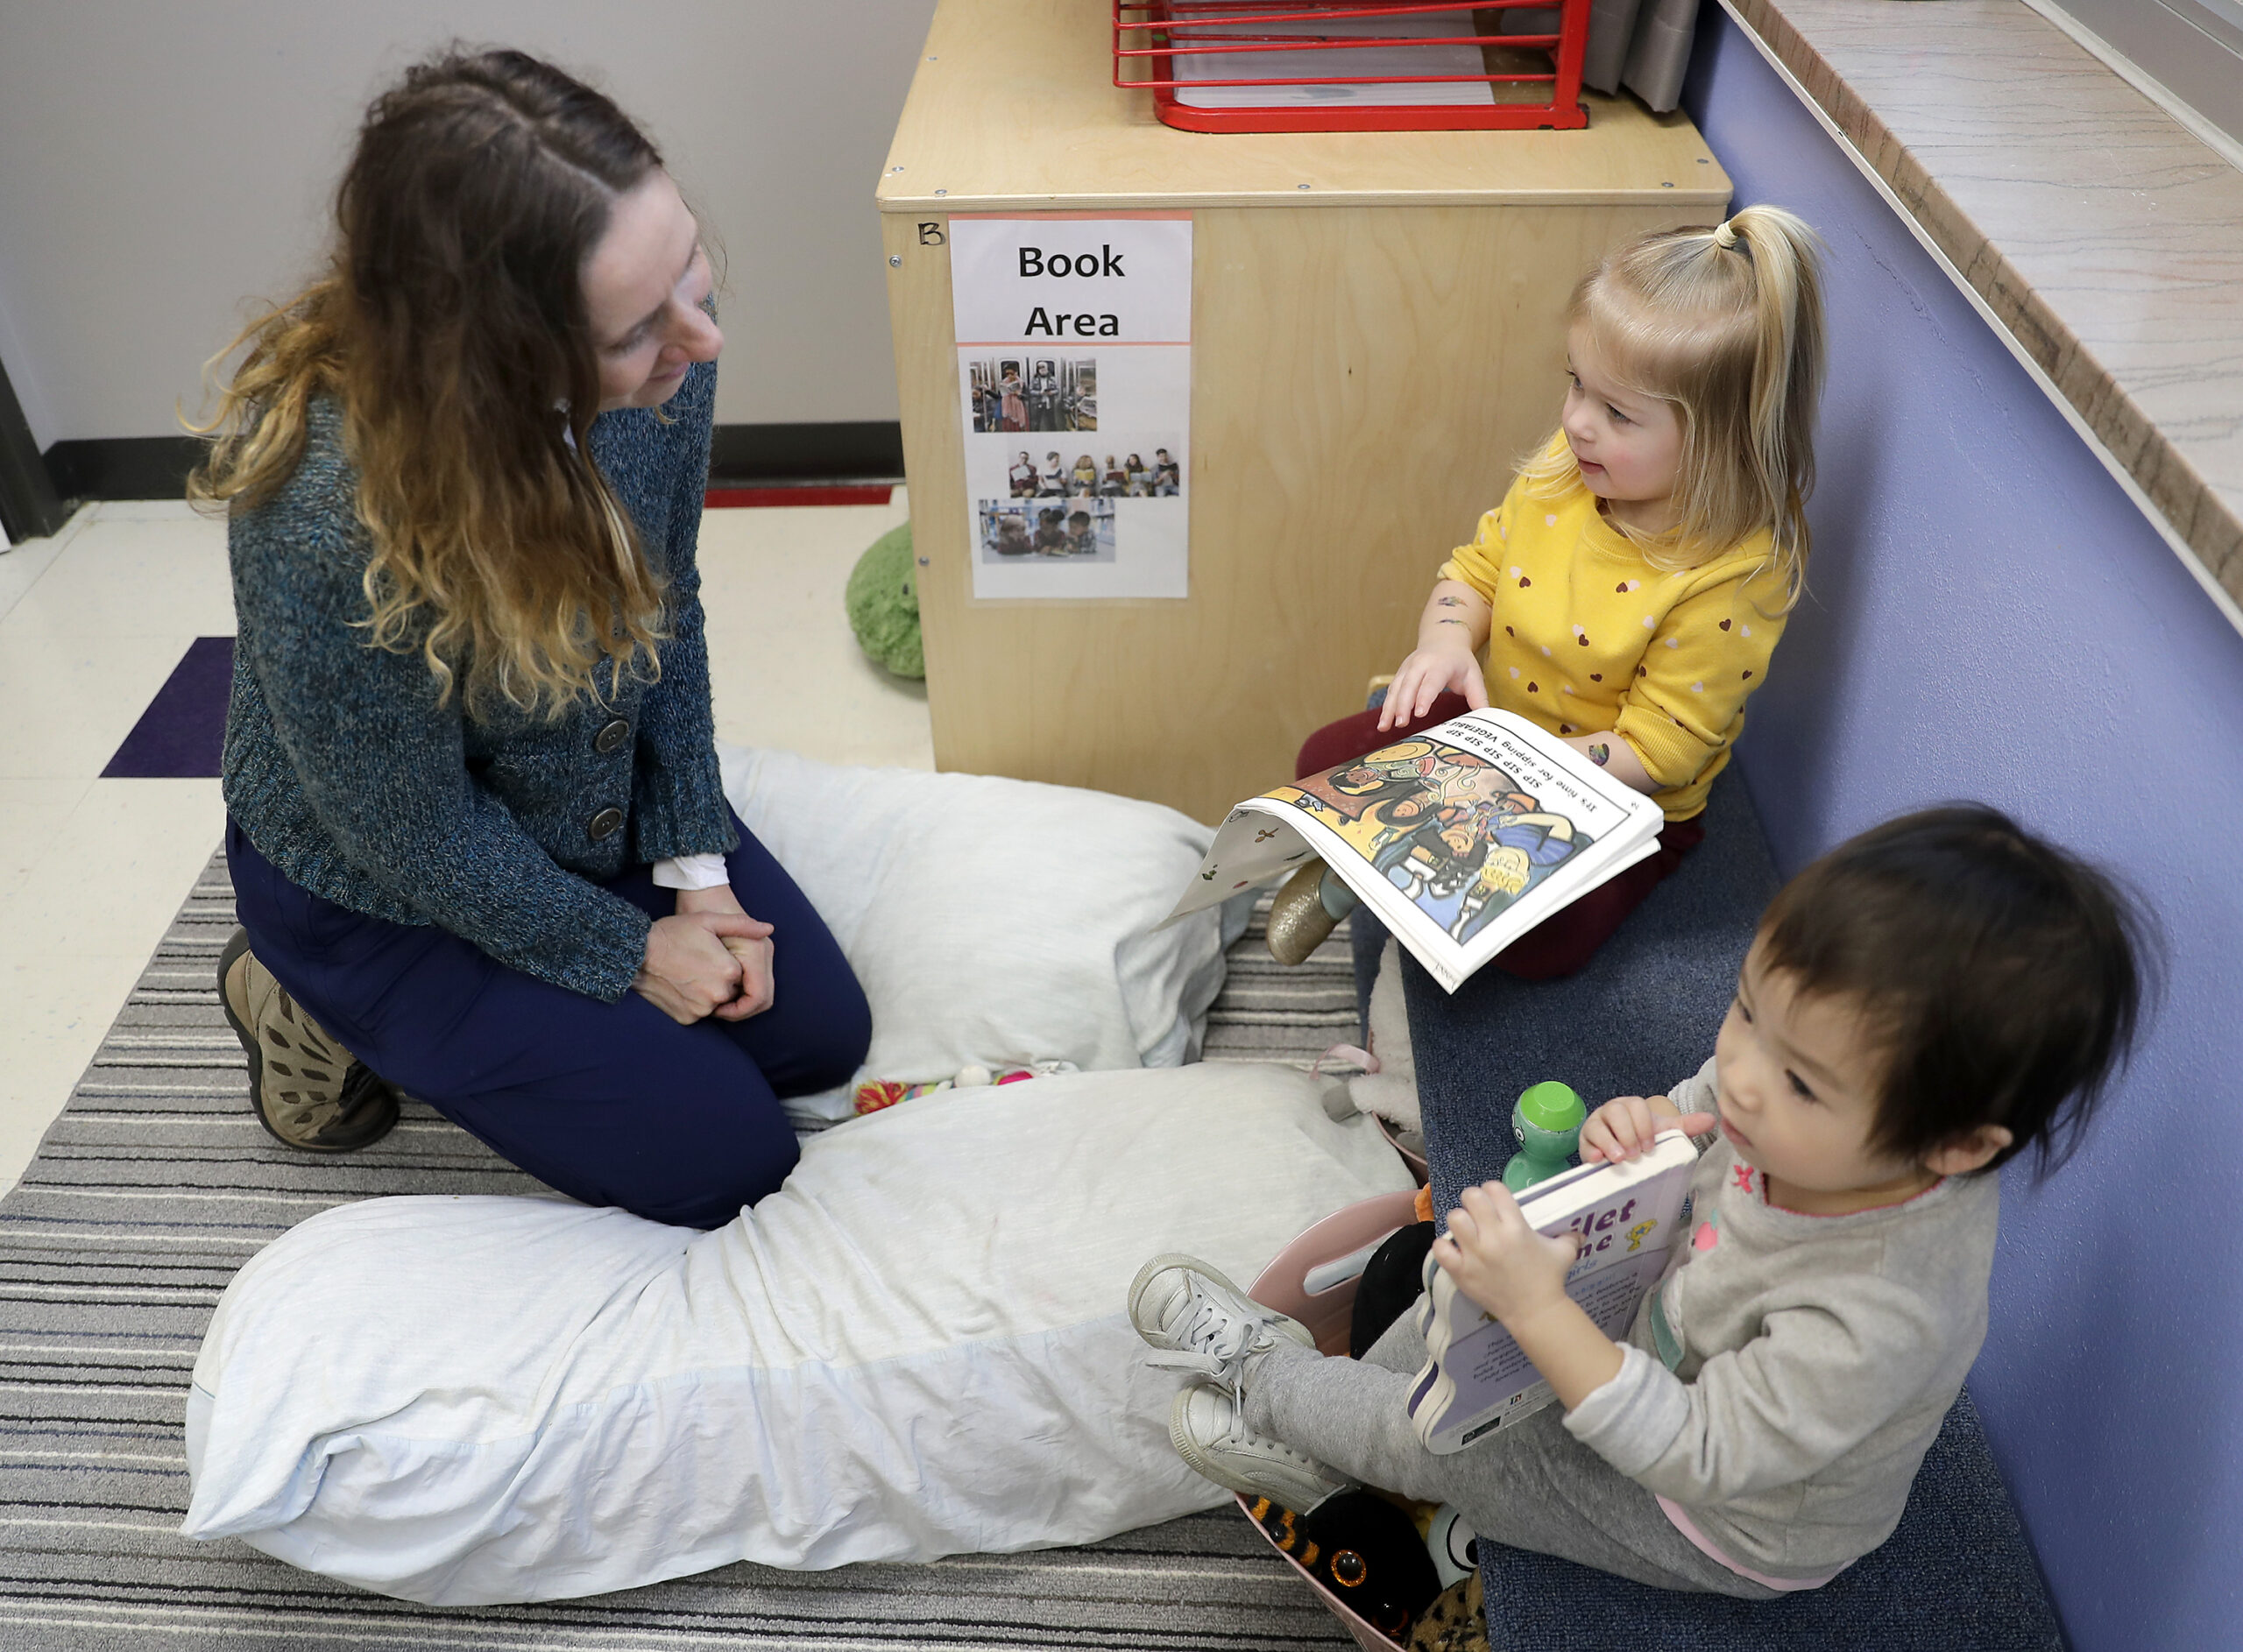 Wisconsin Department of Children and Families Secretary Emilie Amundson visits with Kynlee Giese, center, and Norah Zhang, right, during a visit at Bridges Child Enrichment Center